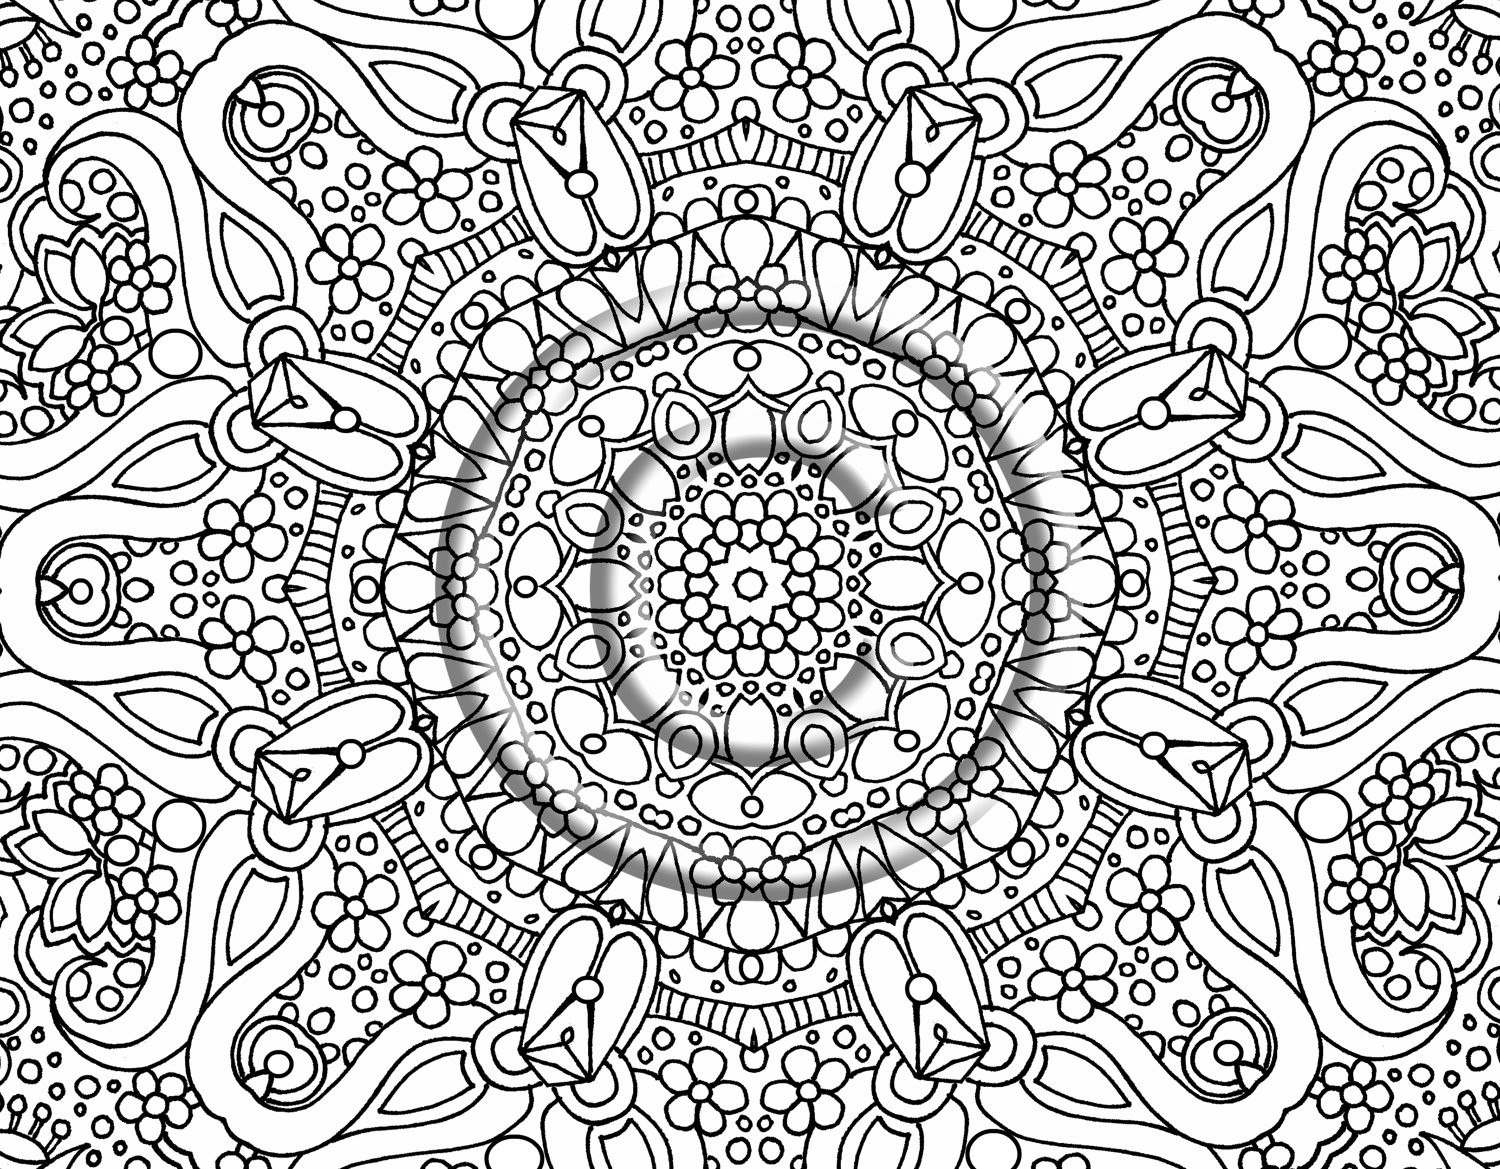 Hard Kids Coloring Pages
 Free Printable Abstract Coloring Pages for Adults